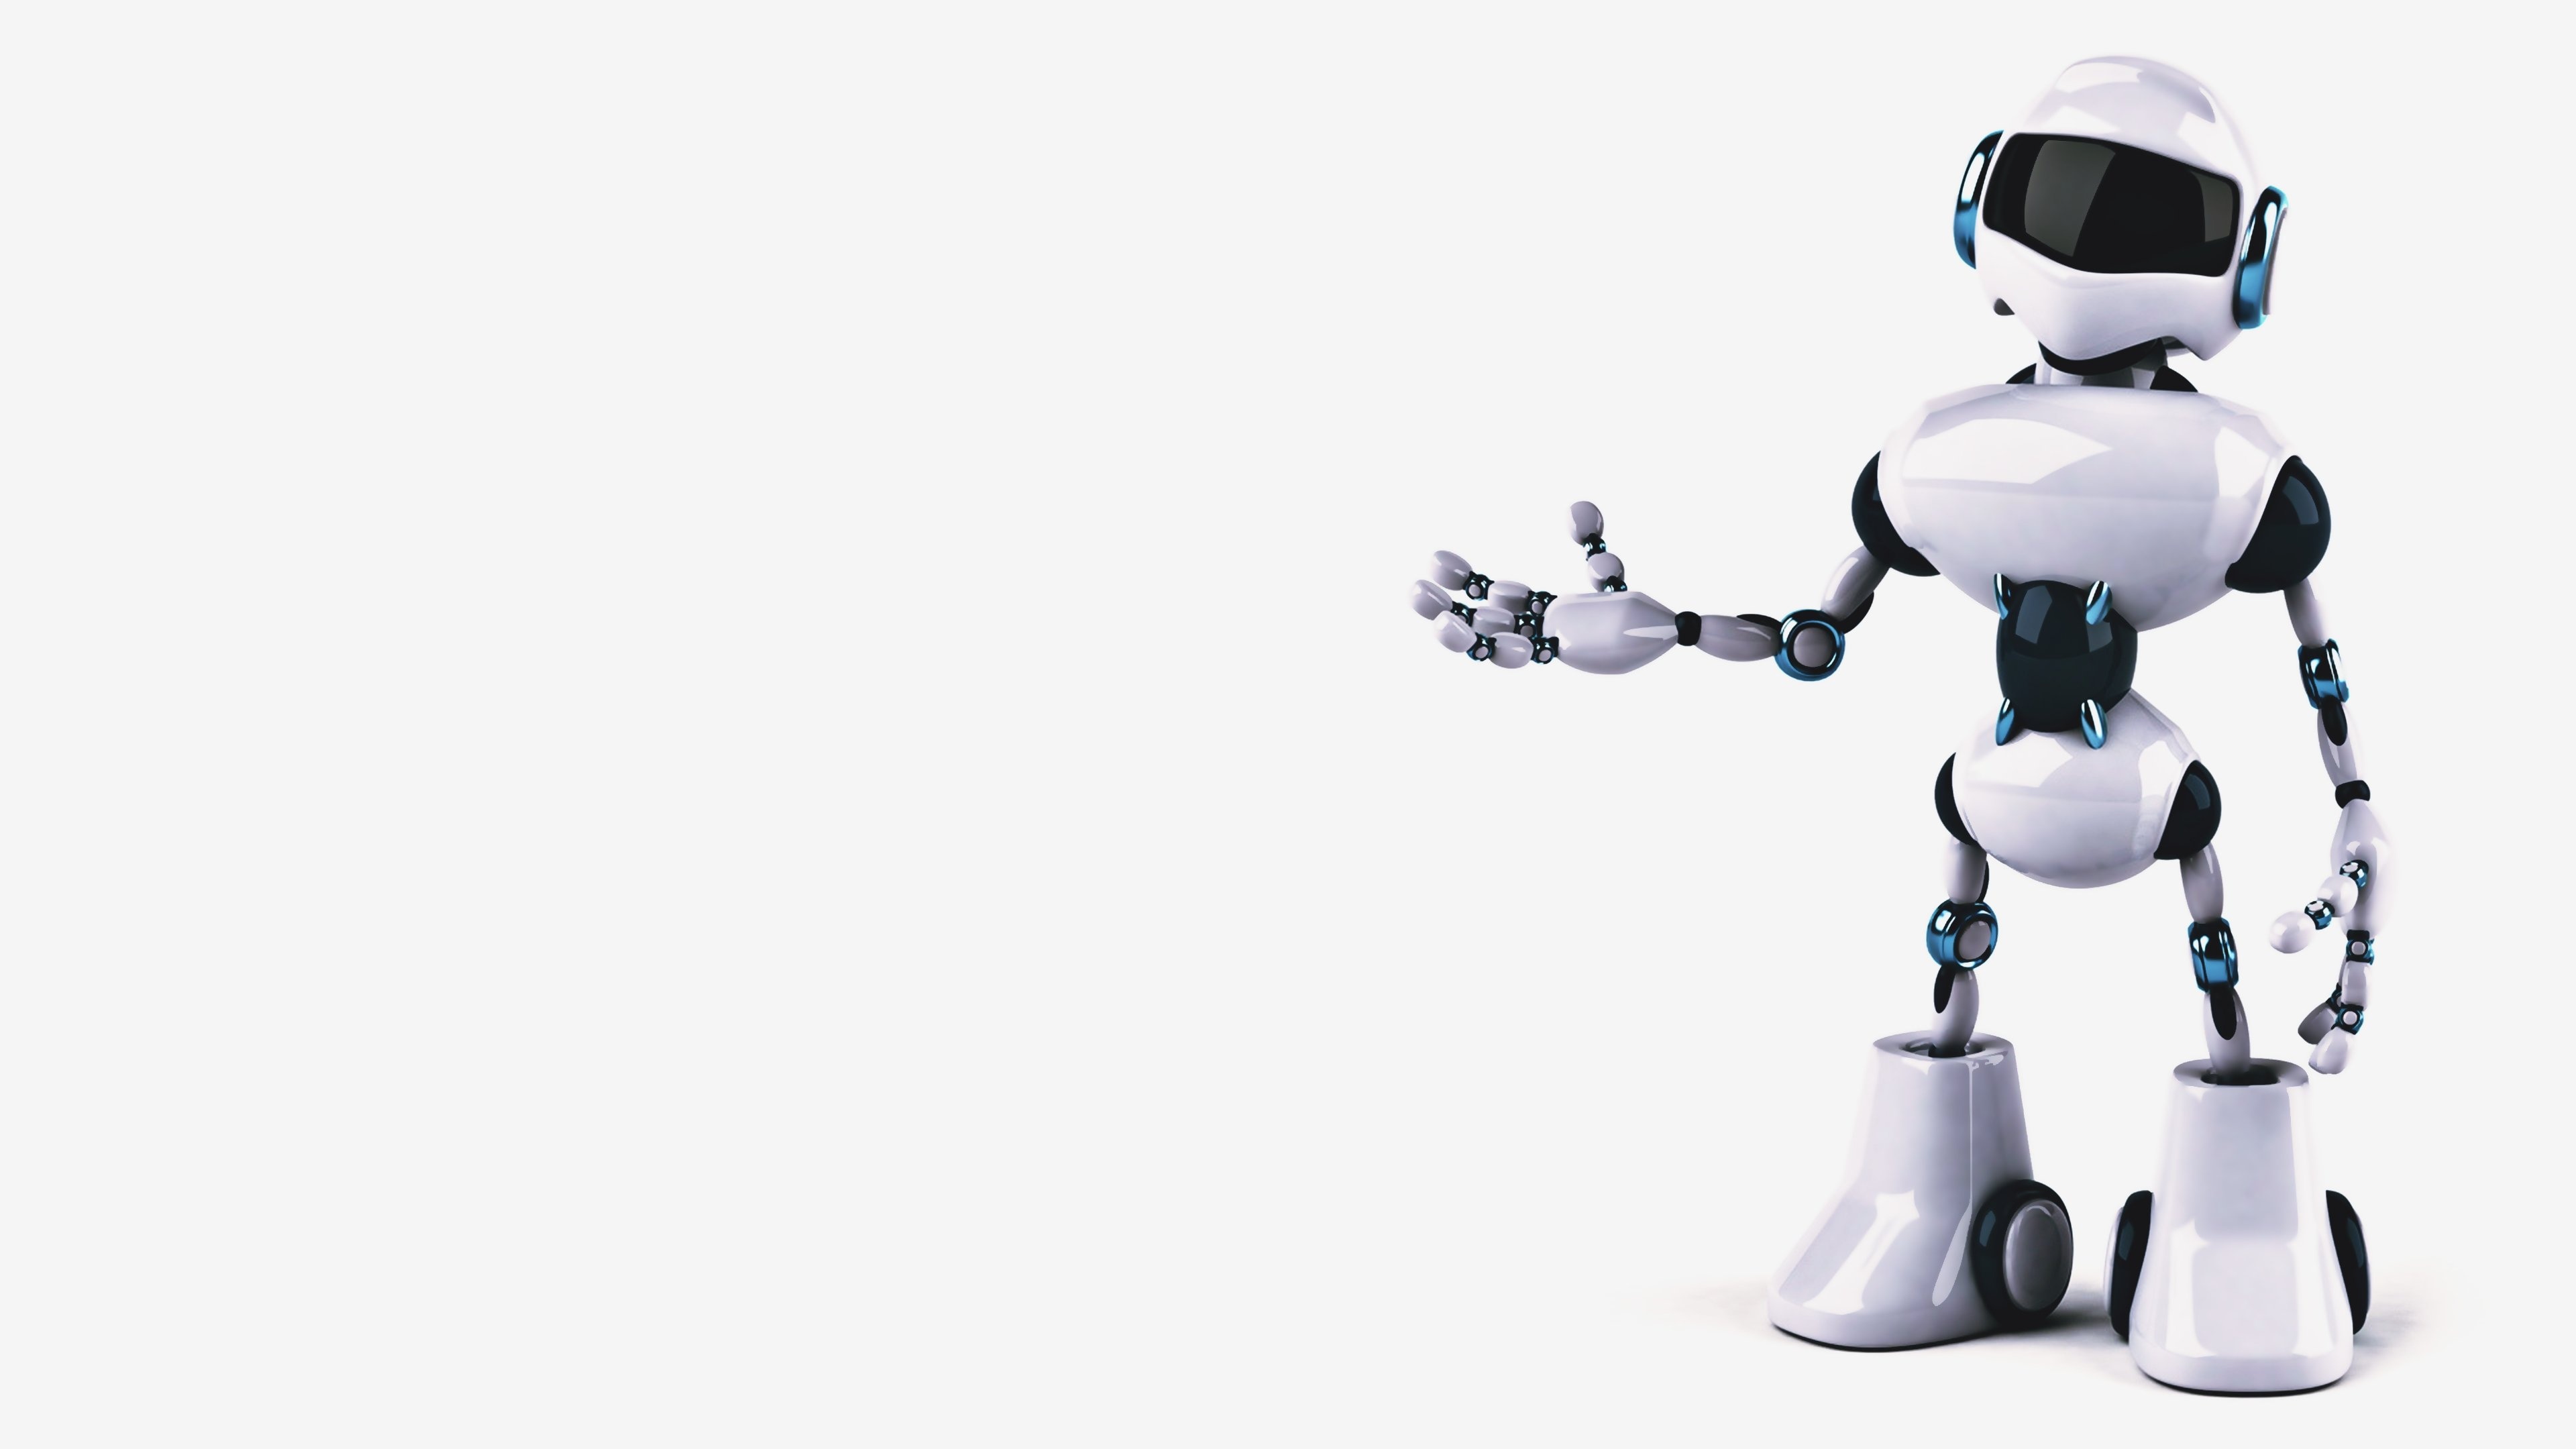 Cute Robot Stock Photos and Images - 123RF